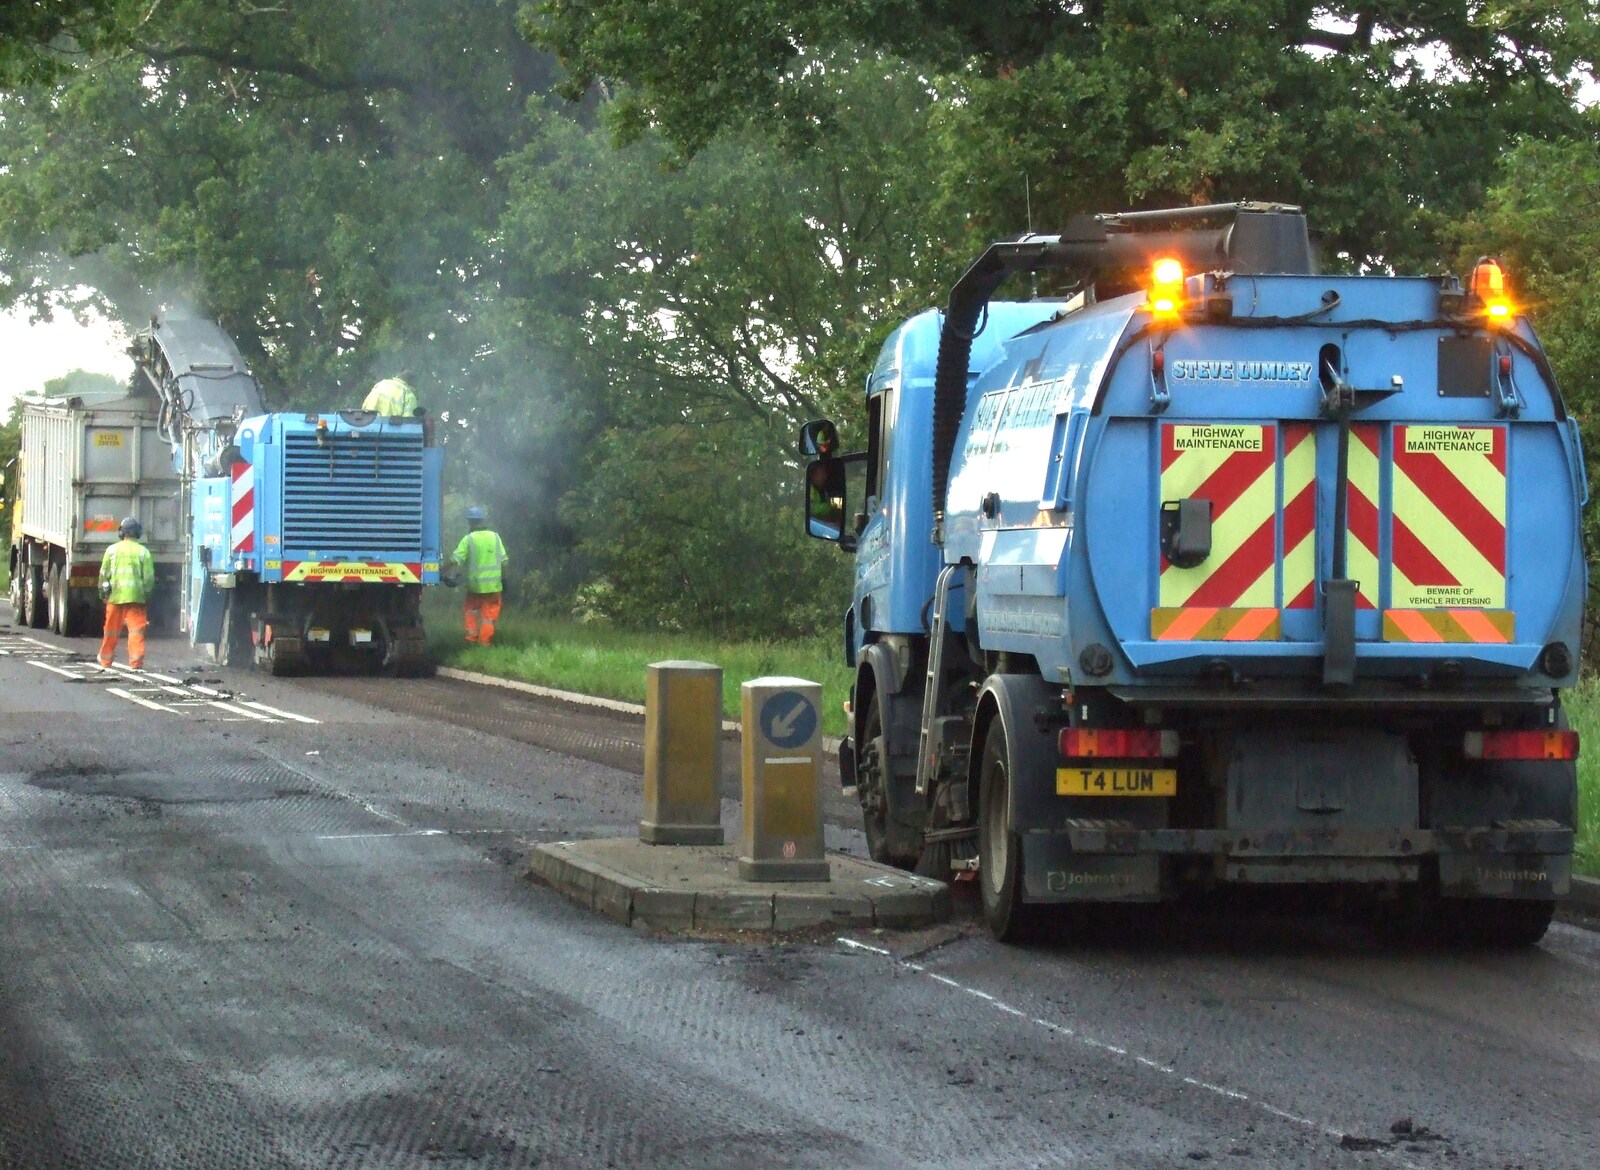 A road sweeper cleans up from Paella and Roadworks, Brome, Suffolk - 9th July 2011